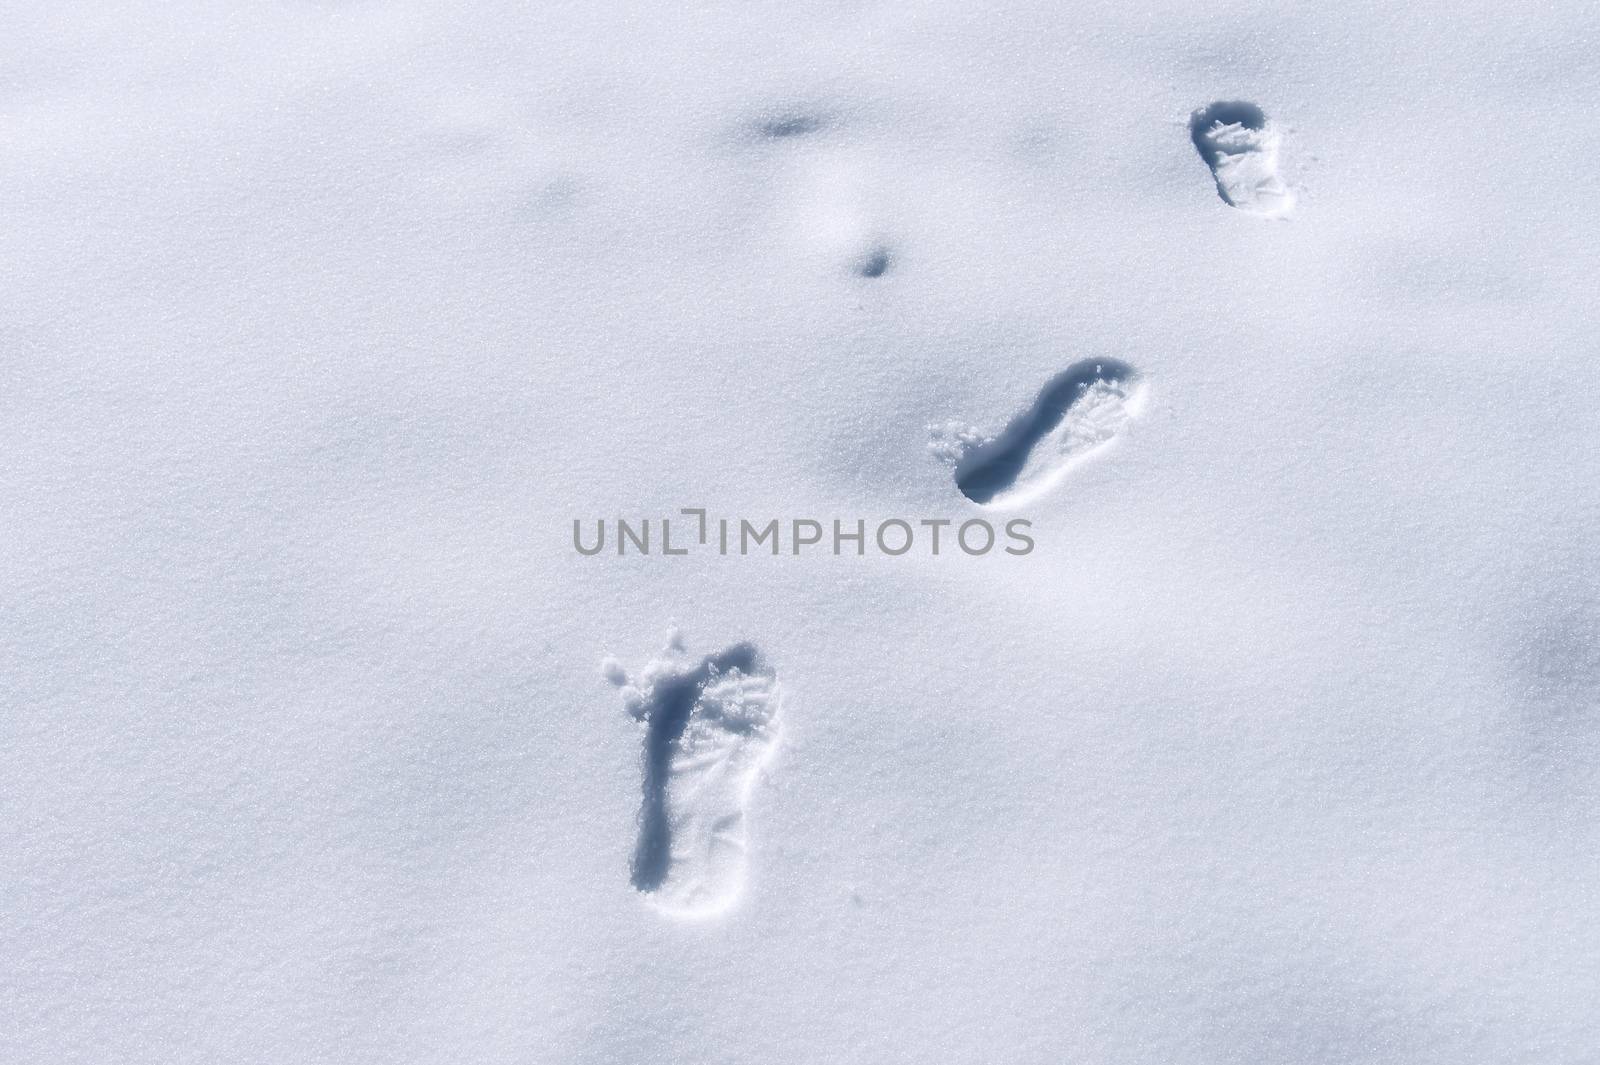 Footprints in snow. by gutarphotoghaphy